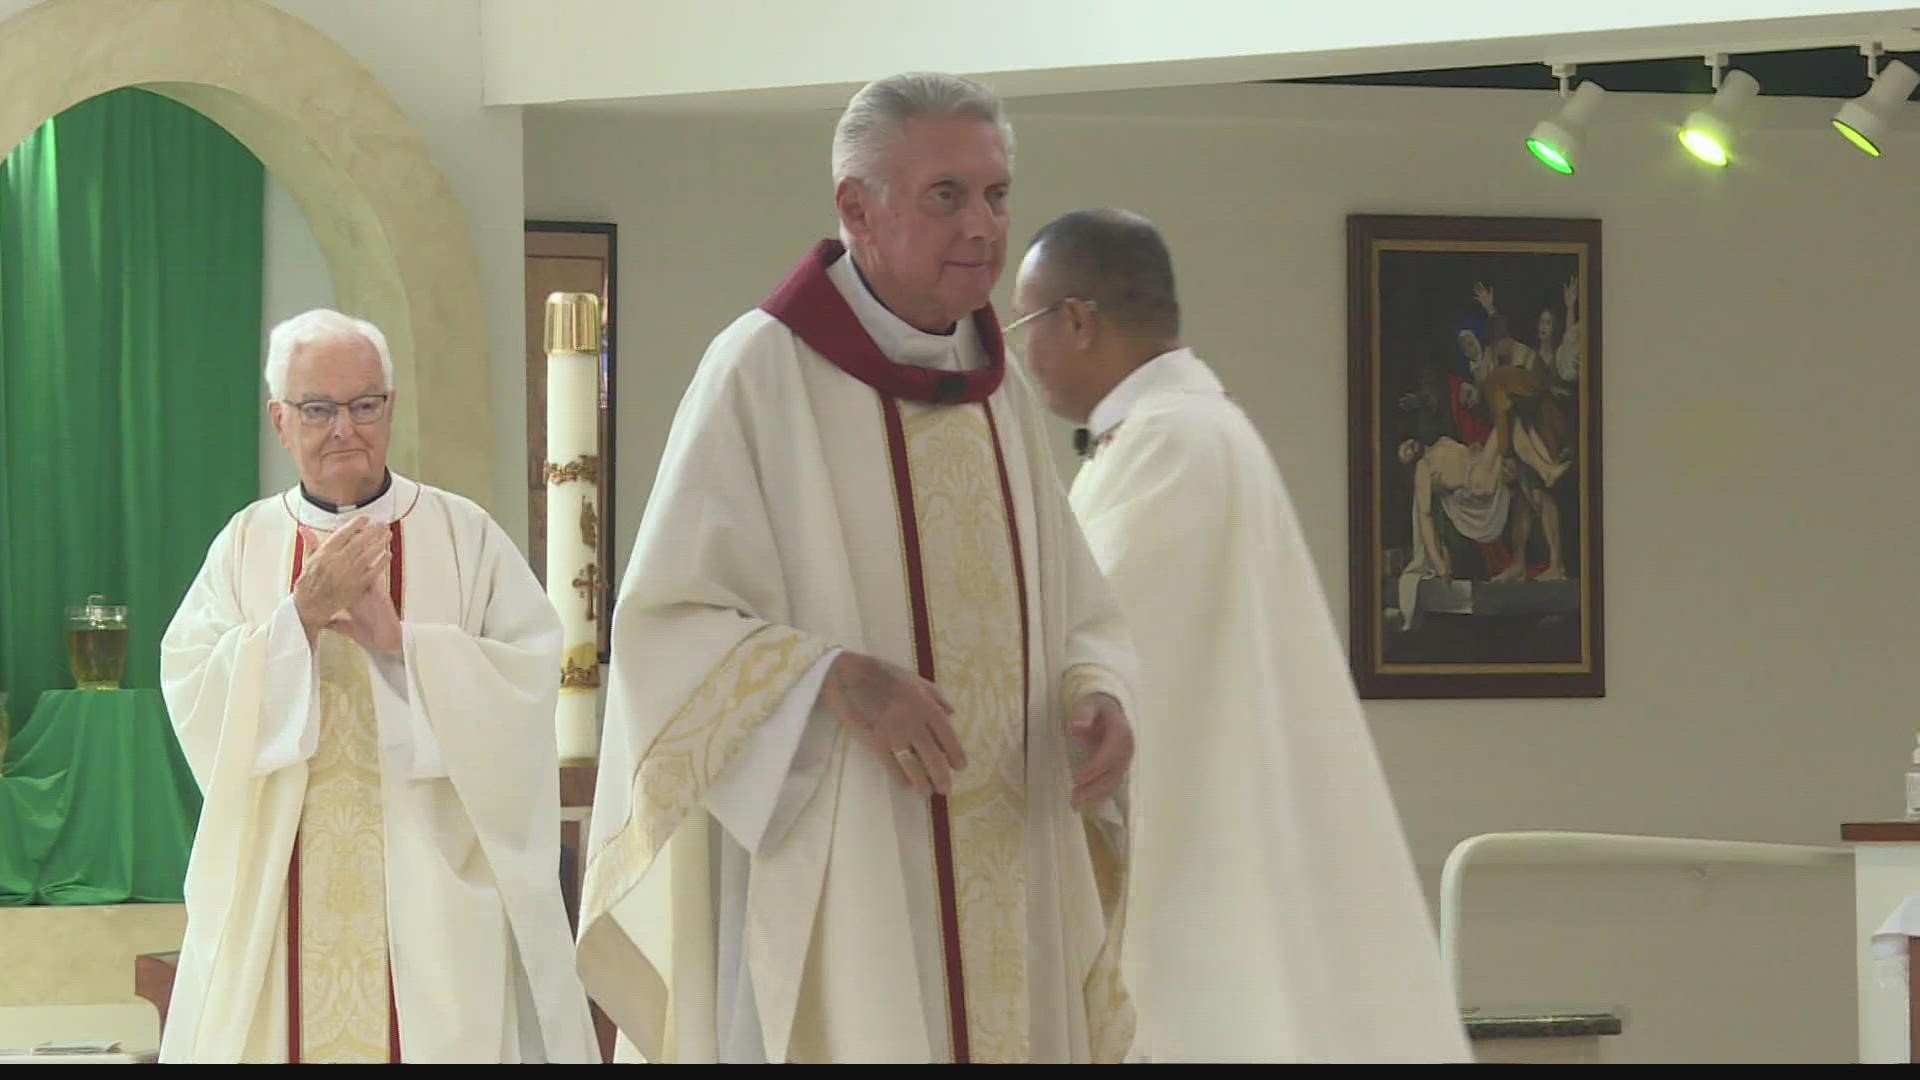 There was a standing ovation on Sunday for Father Robert Caruso who is stepping down as priest of All Saints Roman Catholic Church in Mesa.